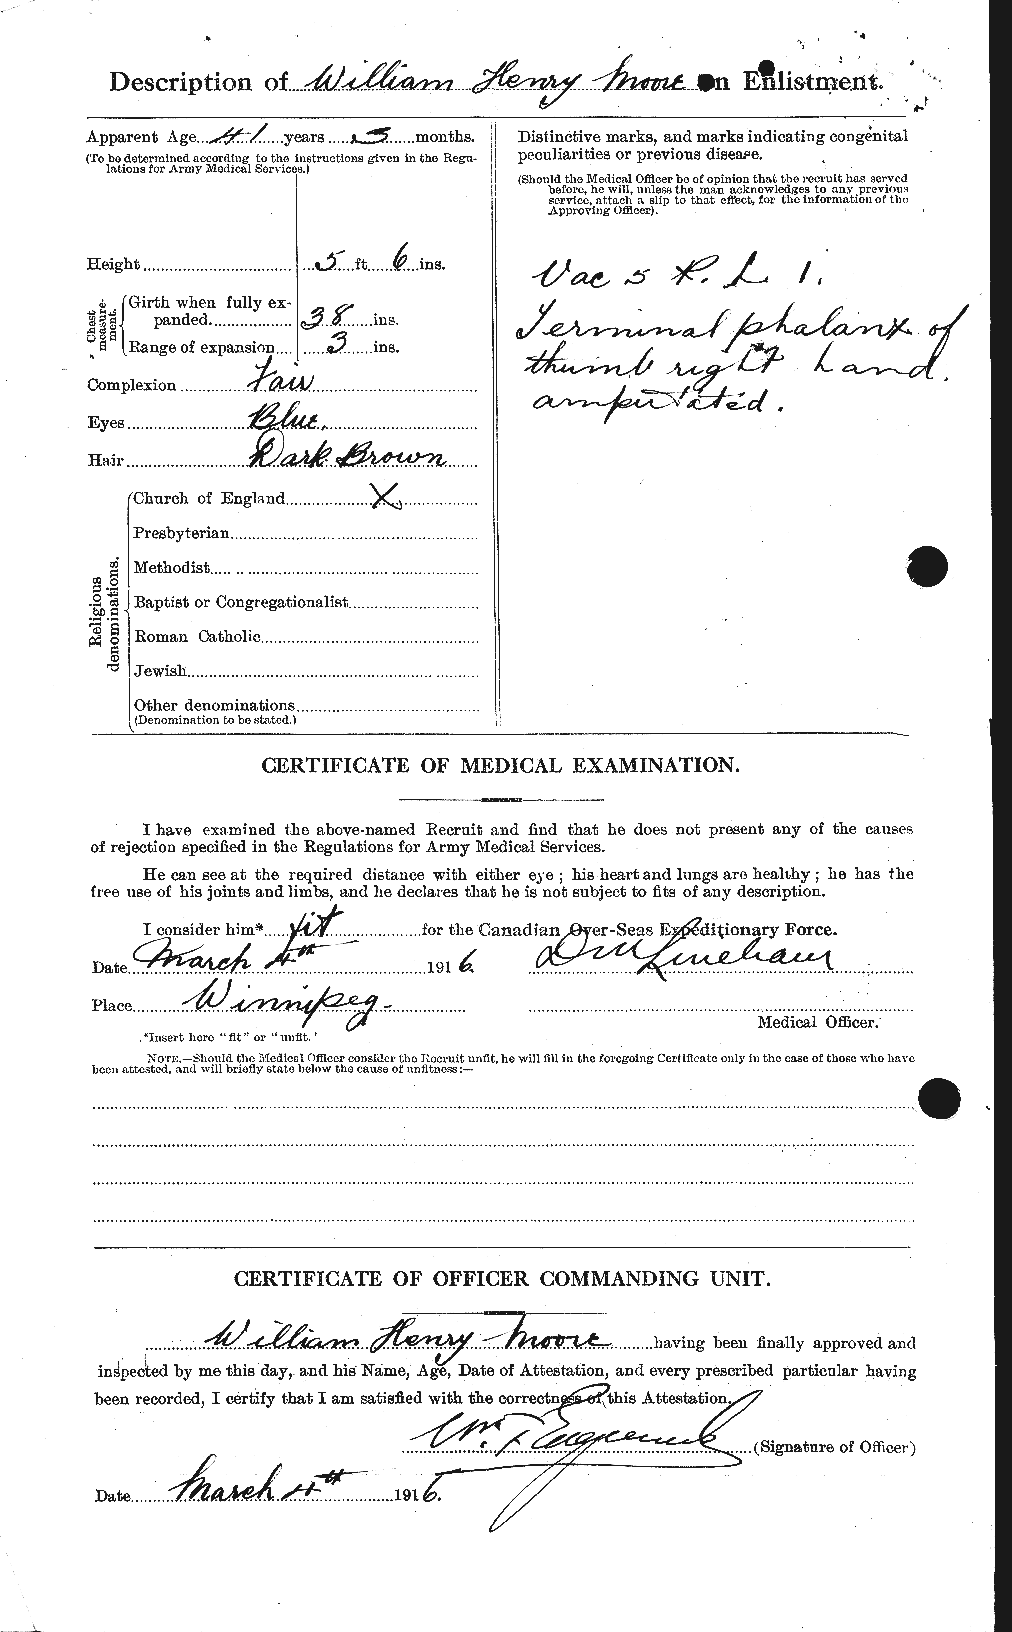 Personnel Records of the First World War - CEF 505820b